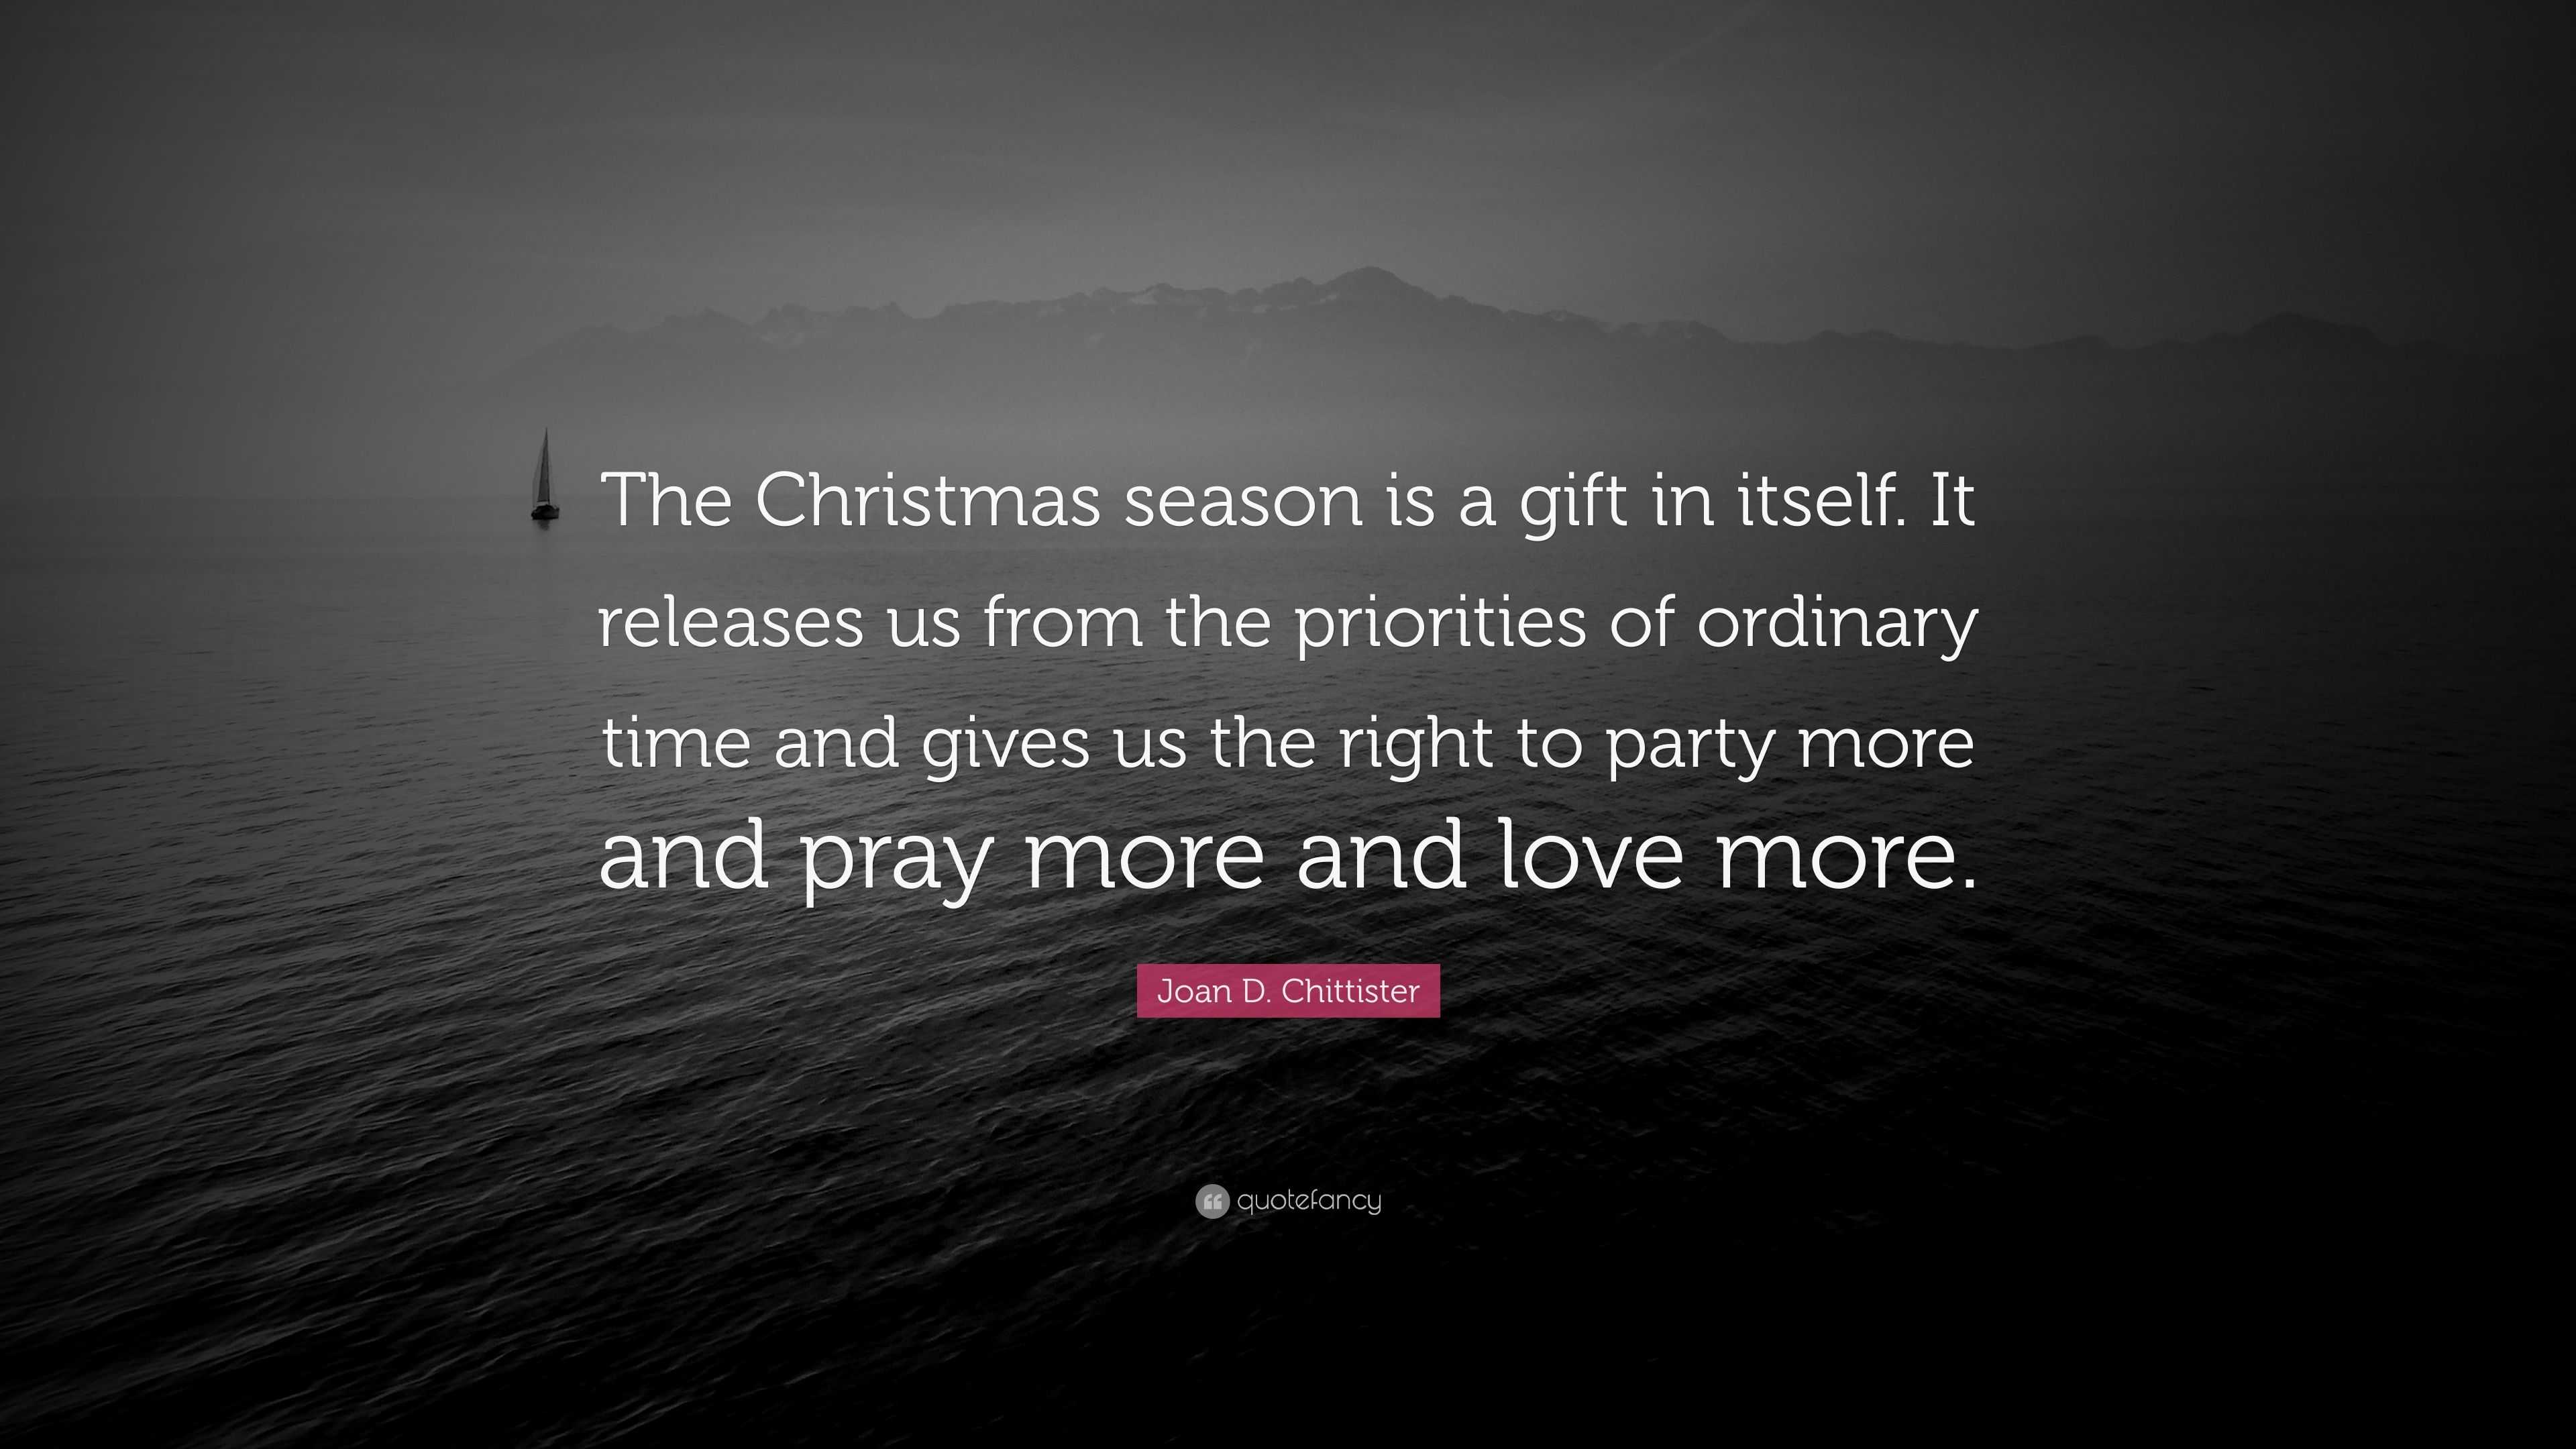 Joan D Chittister Quote “the Christmas Season Is A T In Itself It Releases Us From The